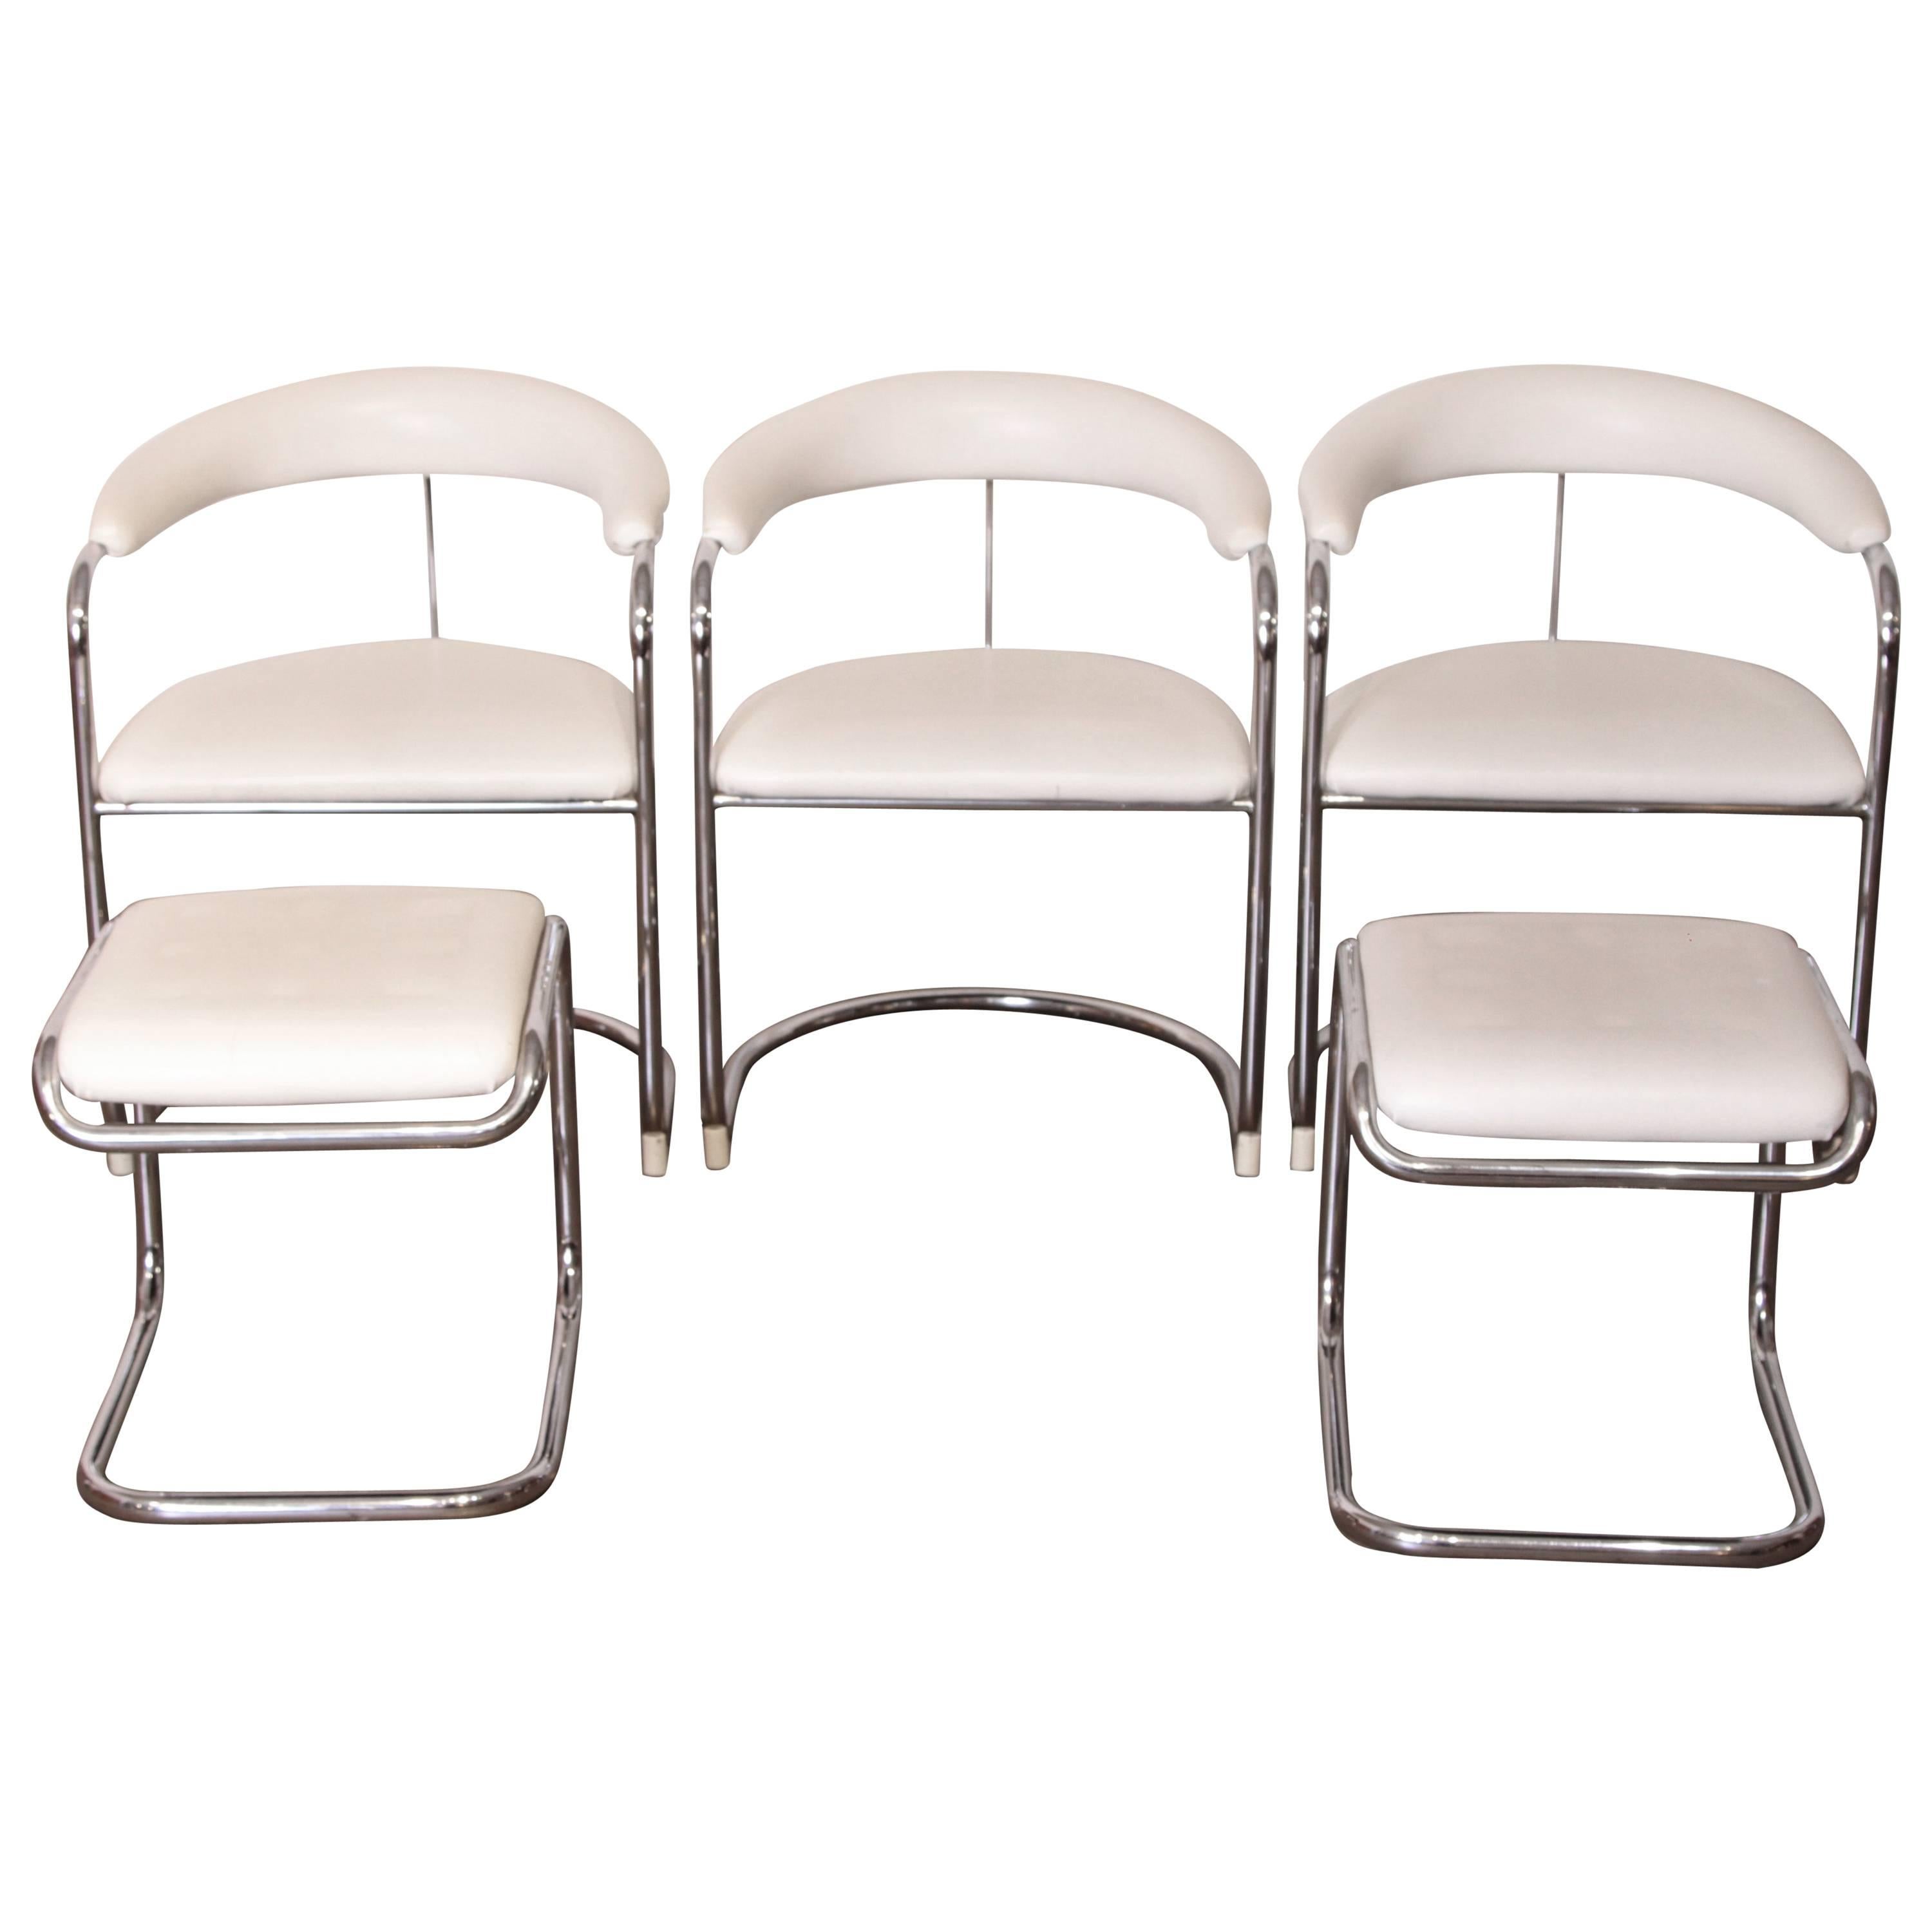 Thonet Midcentury Side Chairs and Ottomans, Five Piece Set, Lorenz Design